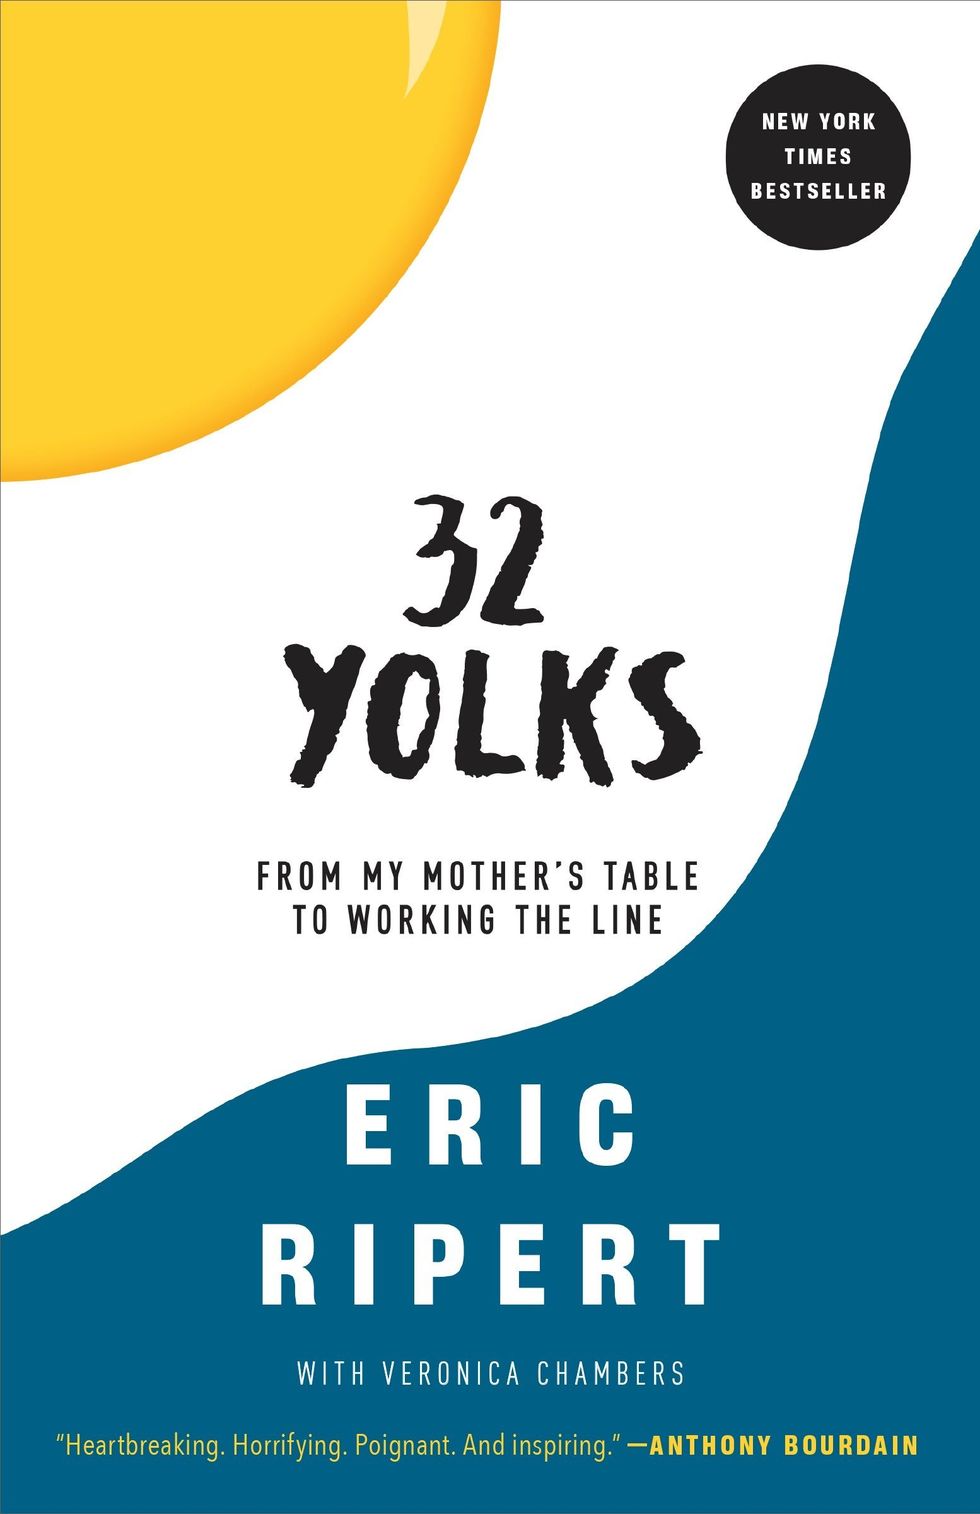 "32 Yolks: From My Mother’s Table to Working the Line" (2016)